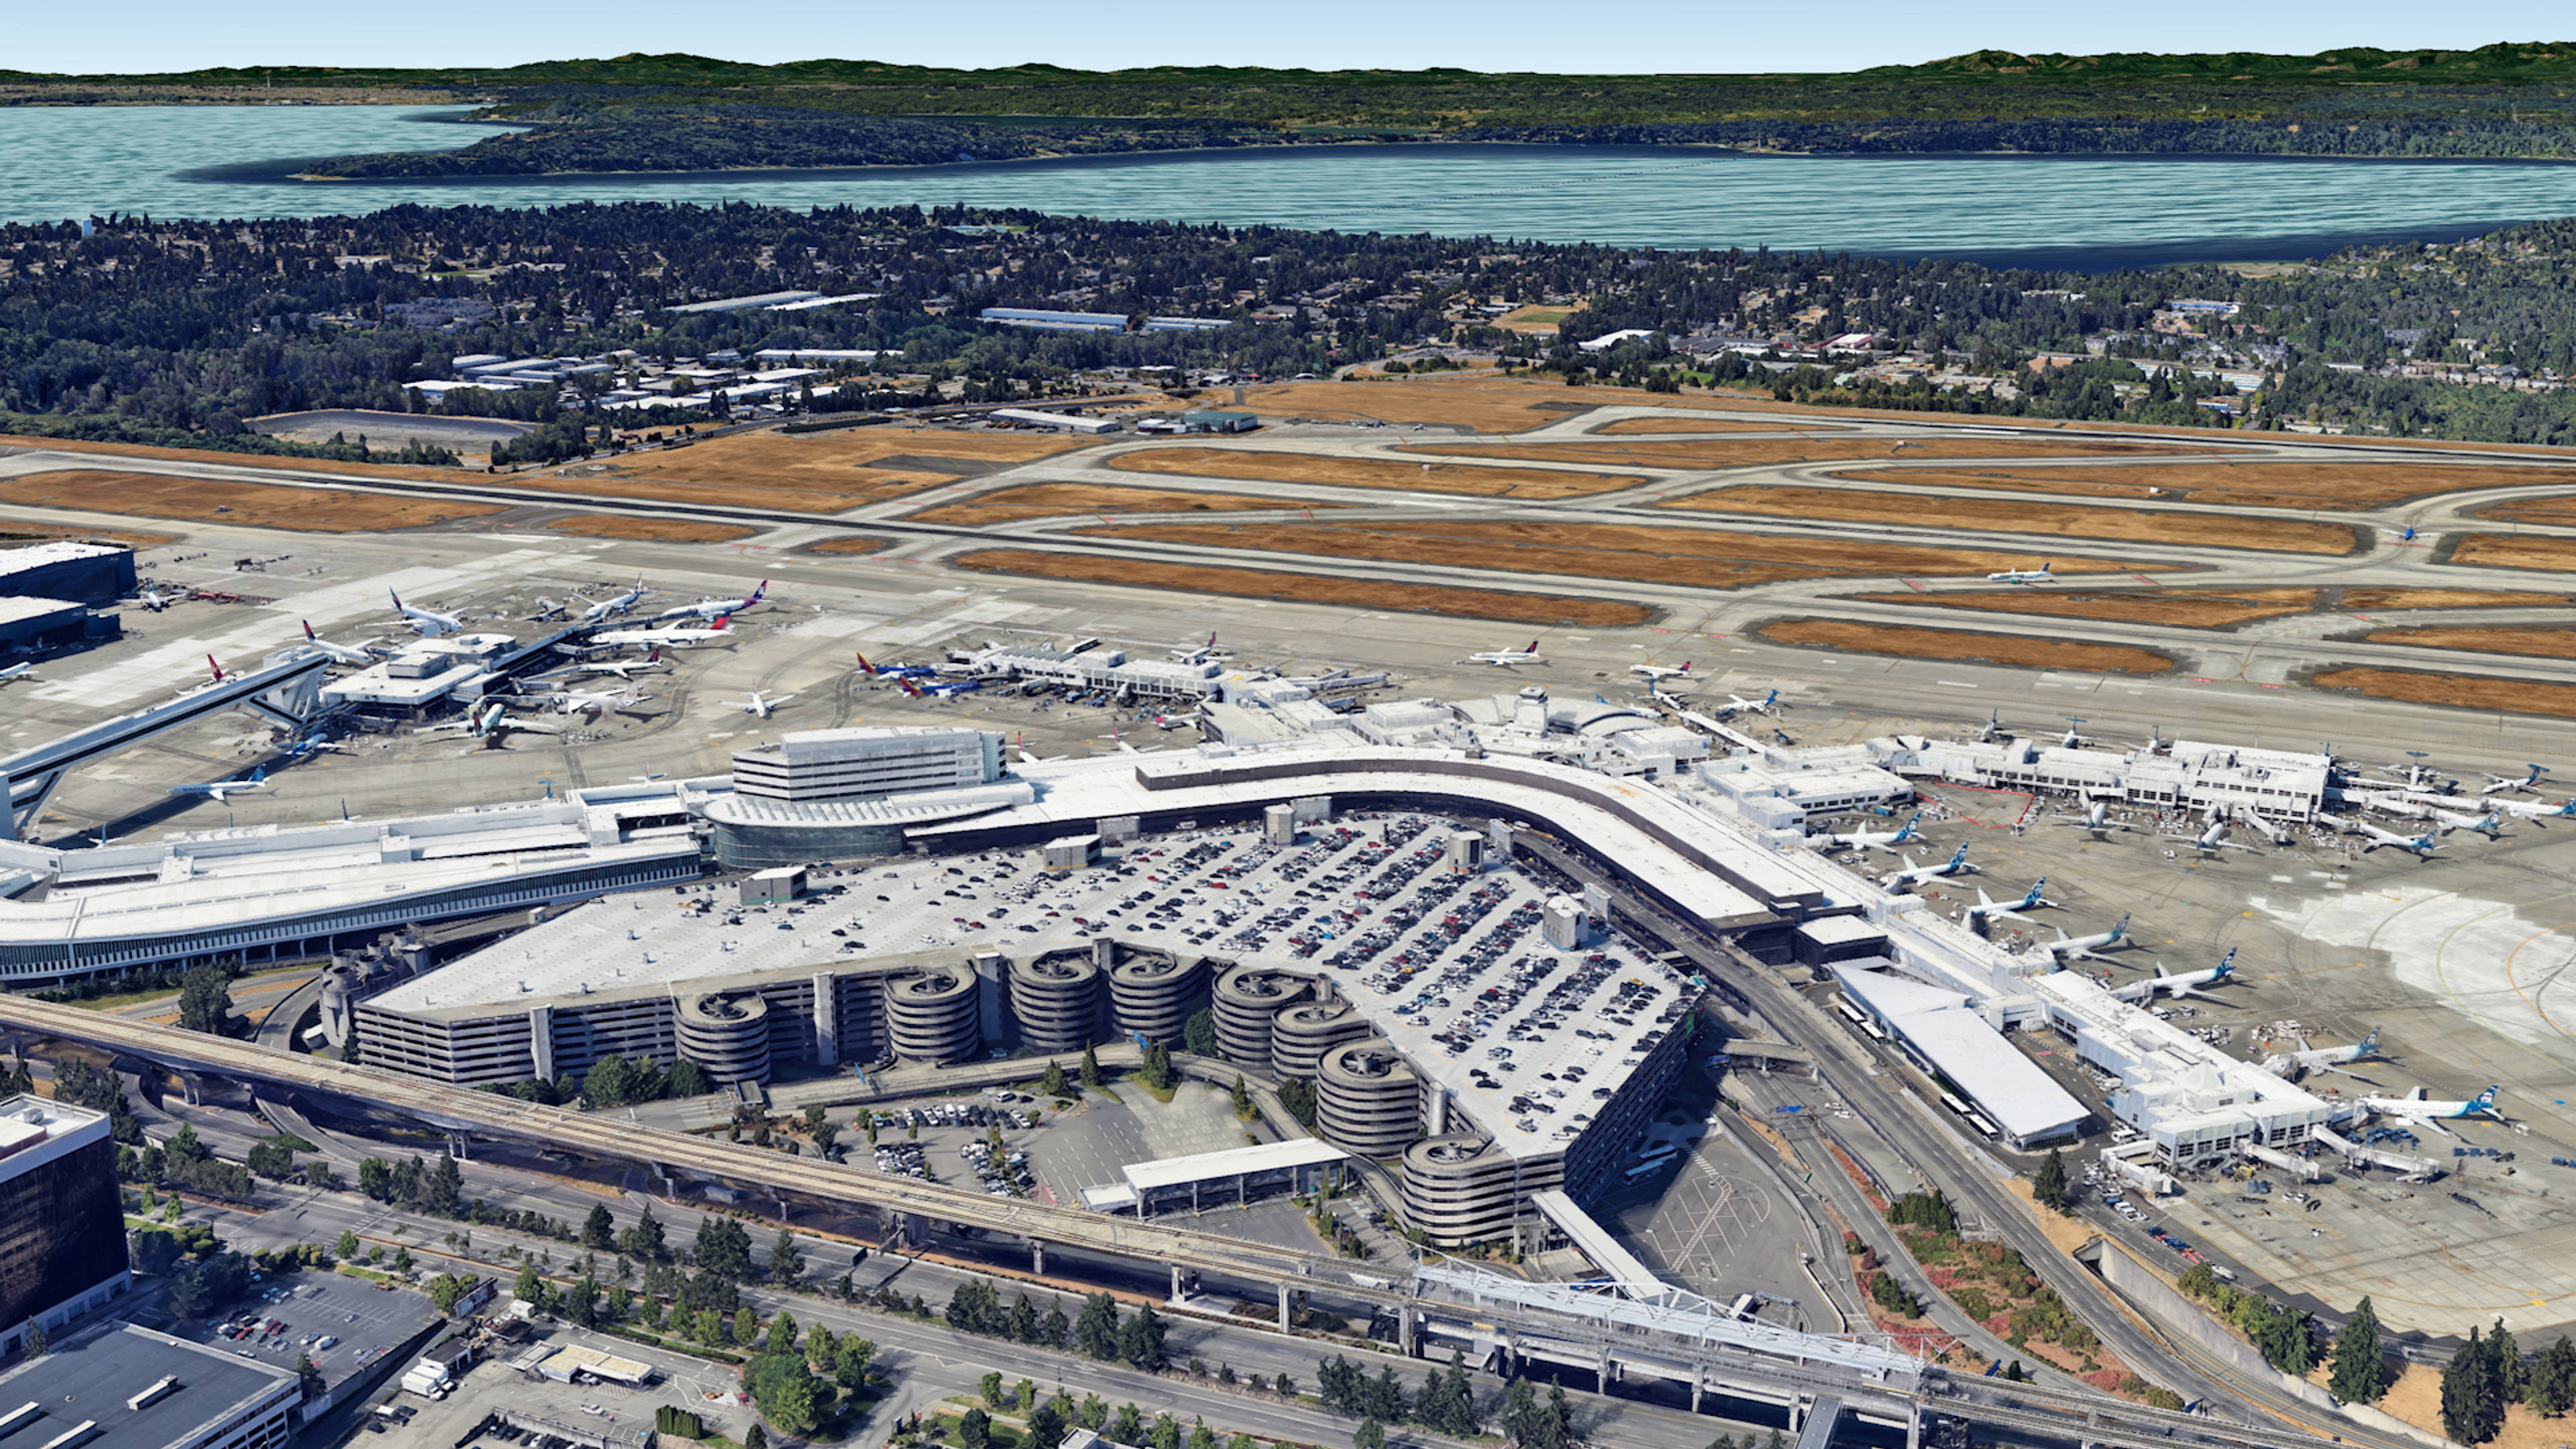  Aerial View of Seattle Airport Parking